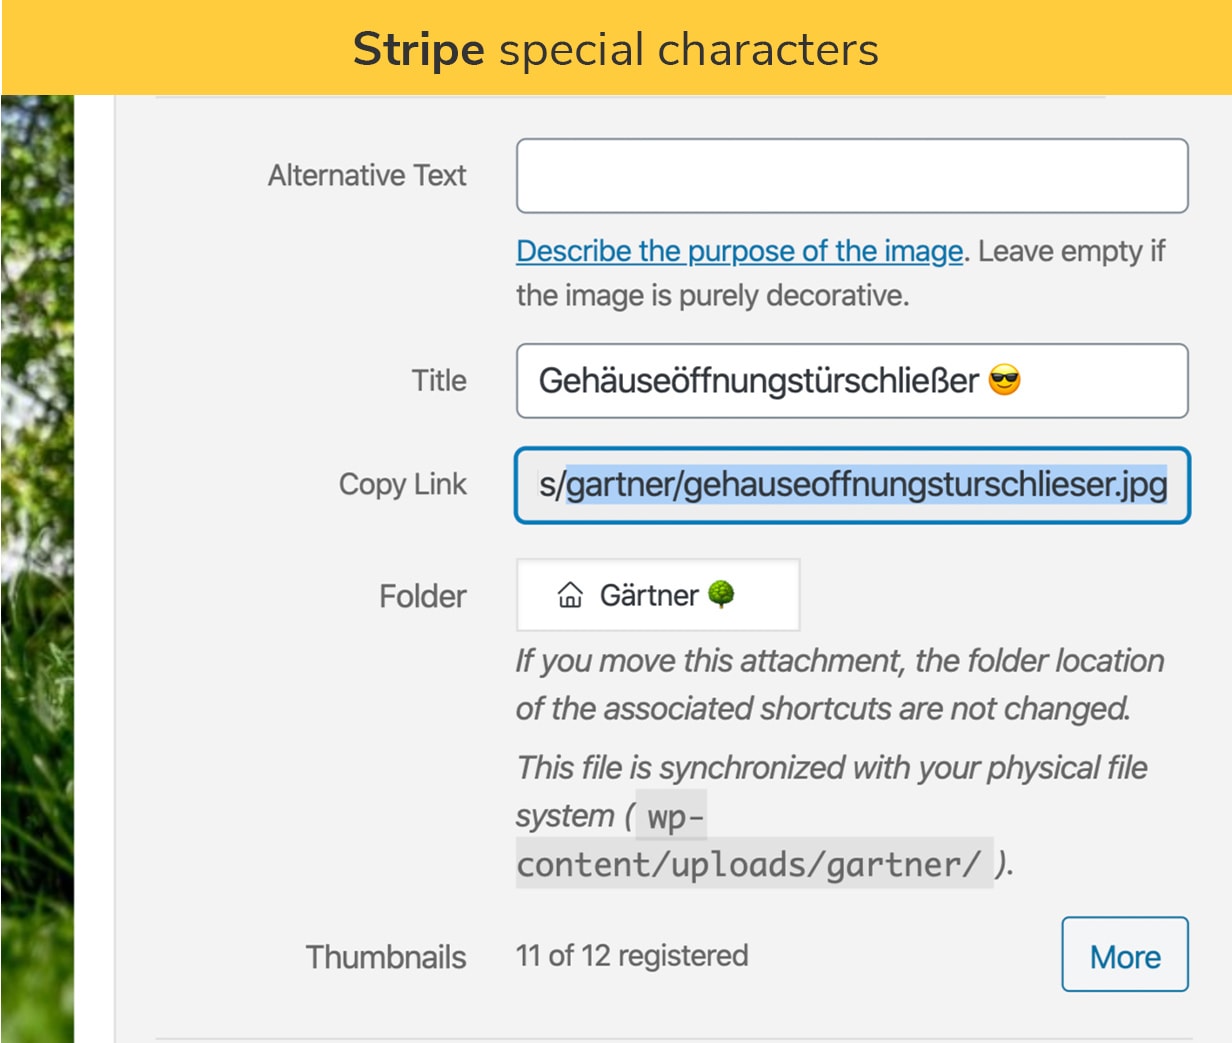 Stripe special characters